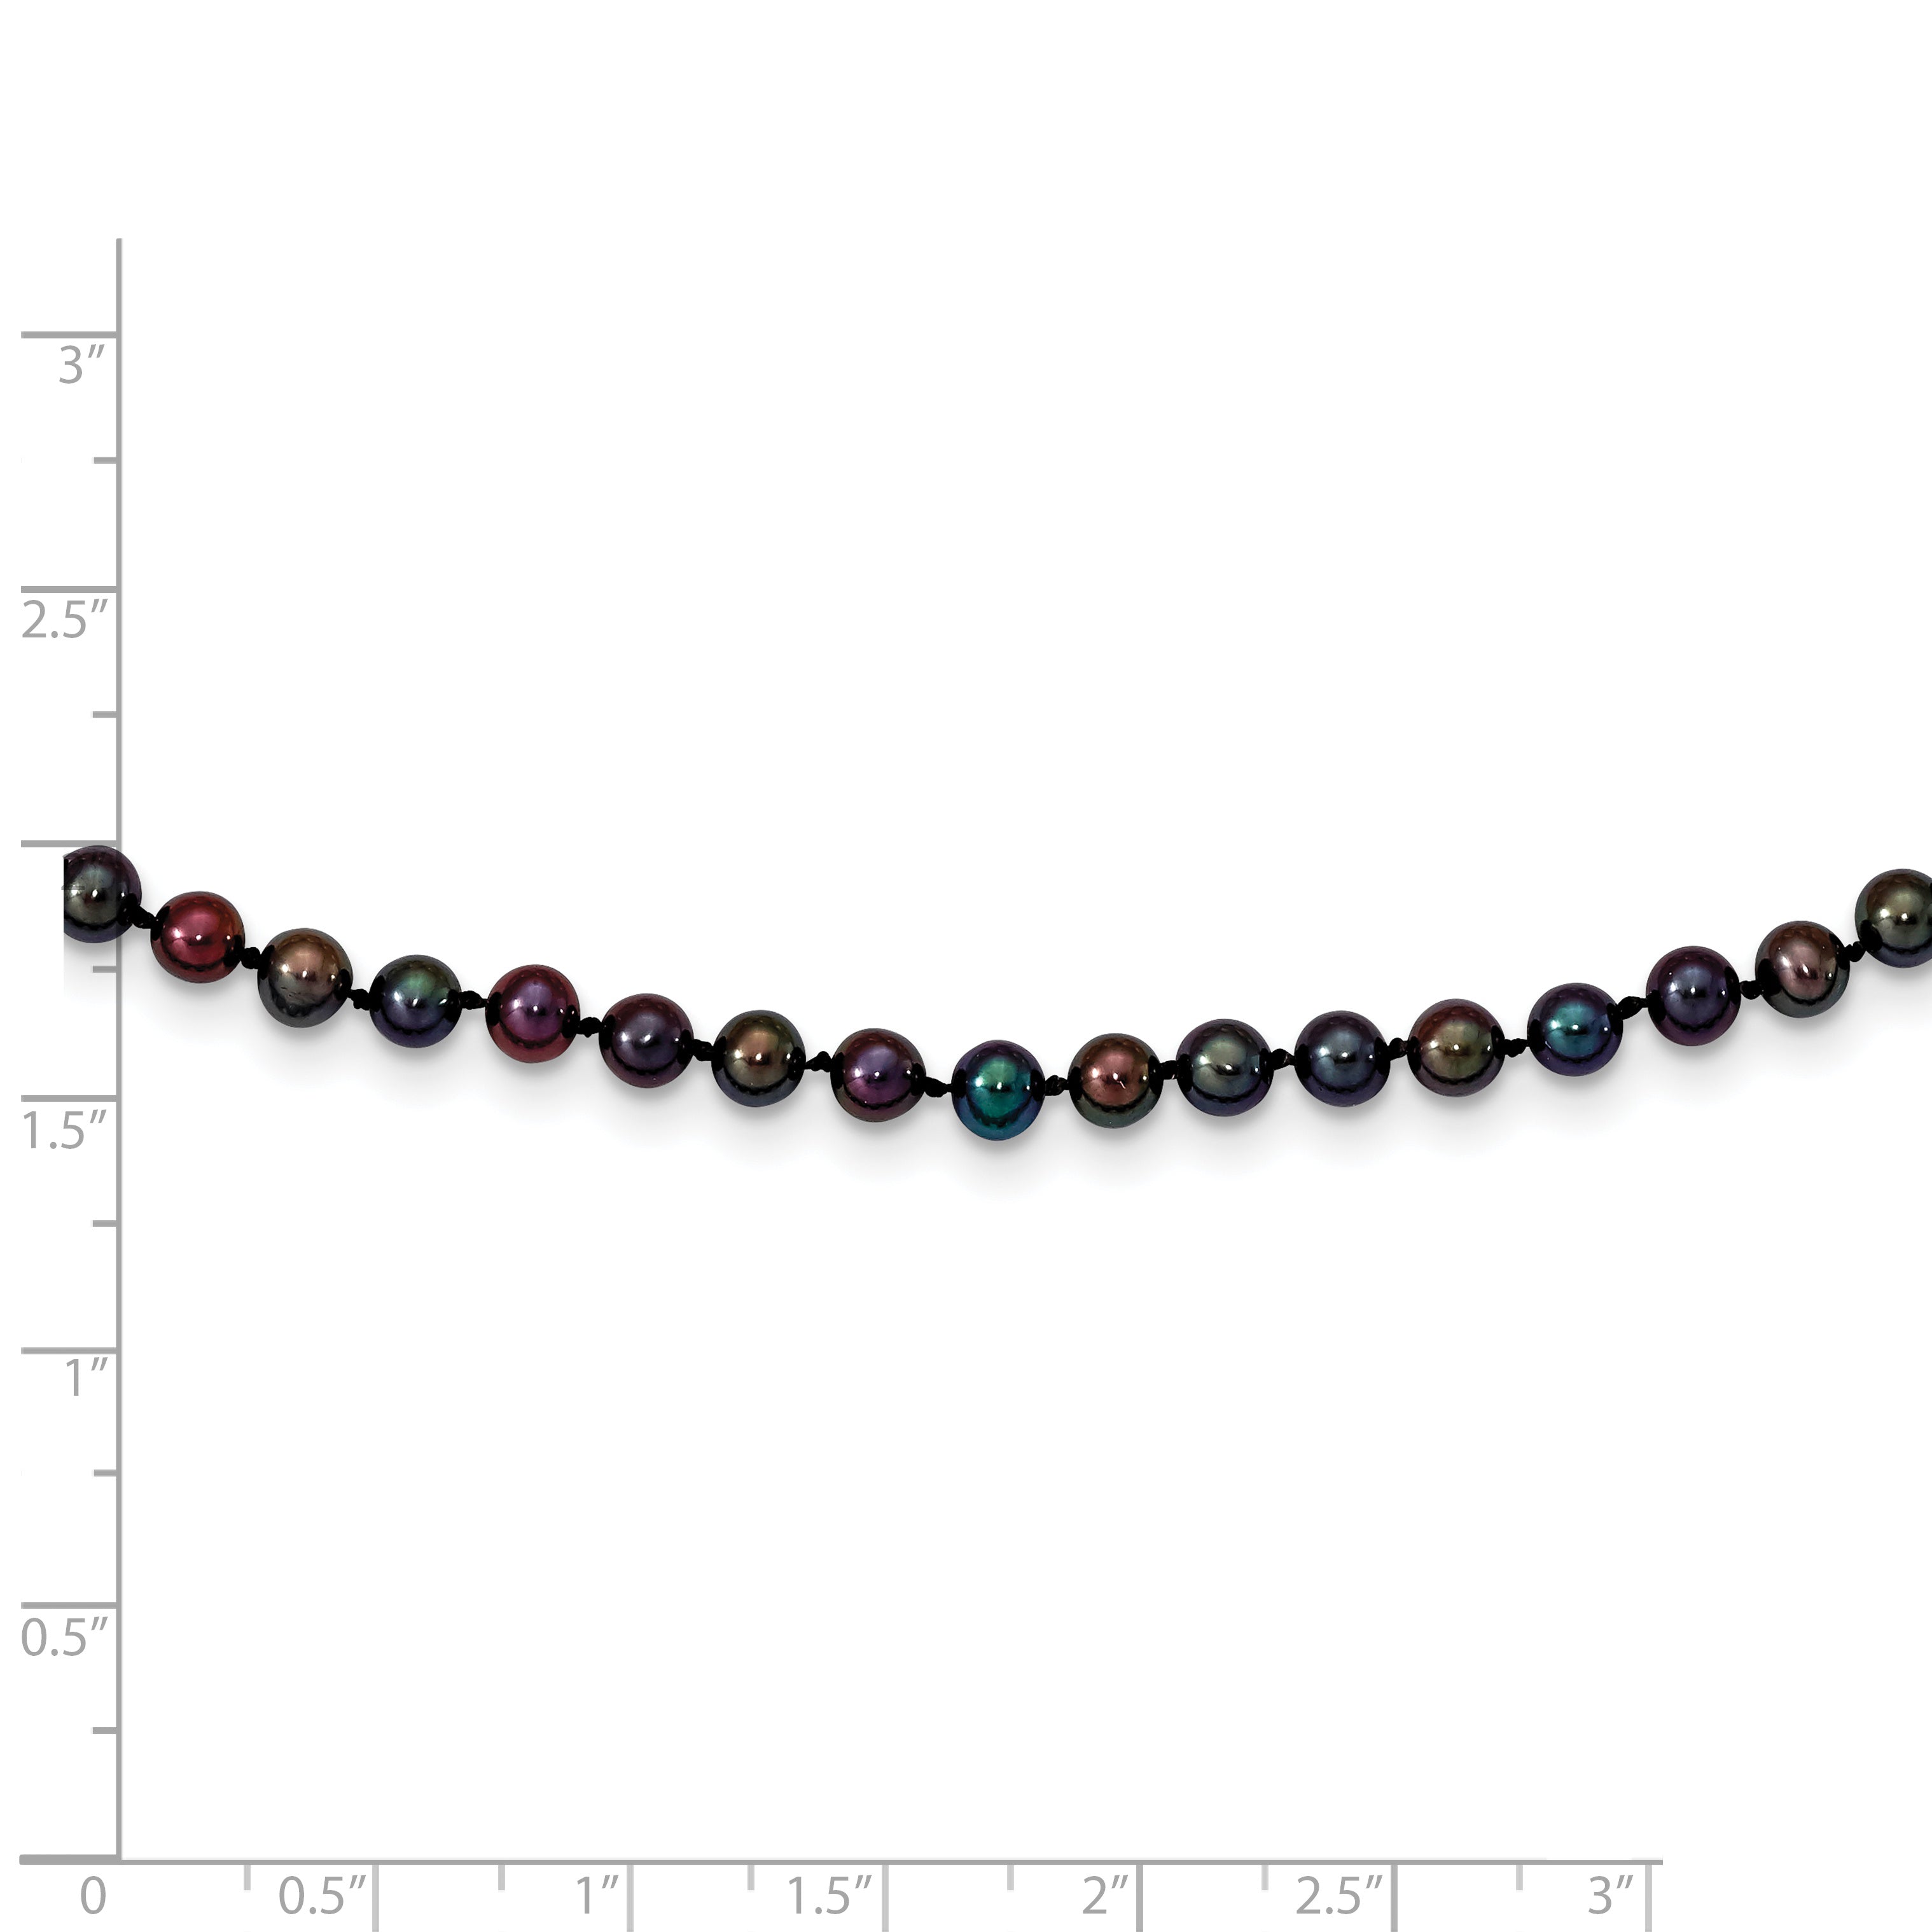 14k 4-5mm Black Near Round Freshwater Cultured Pearl Necklace